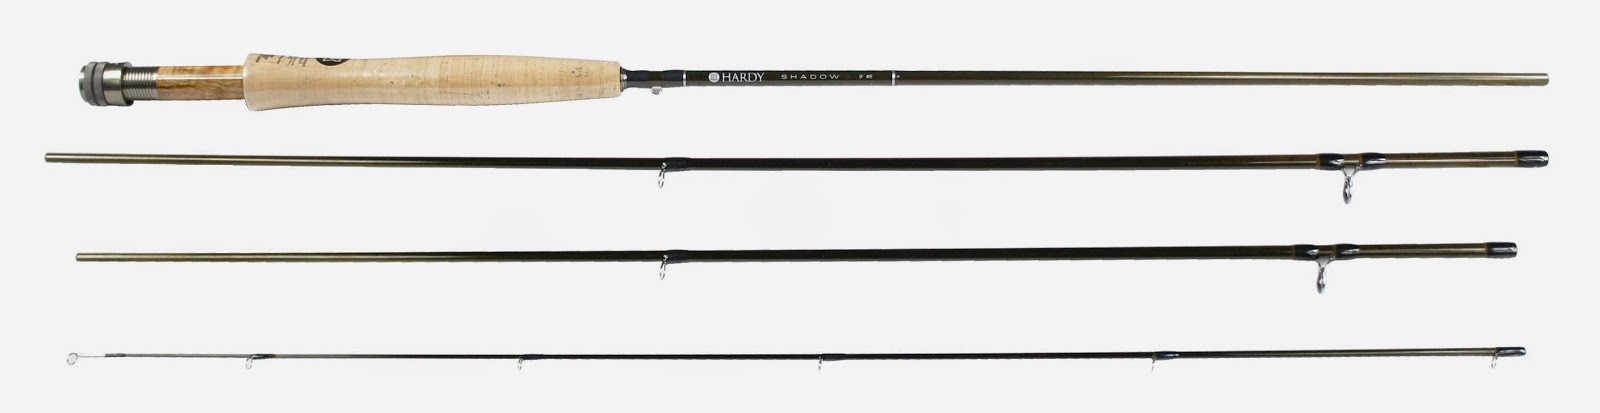 First Look - The Hardy Shadow Fly Rod!